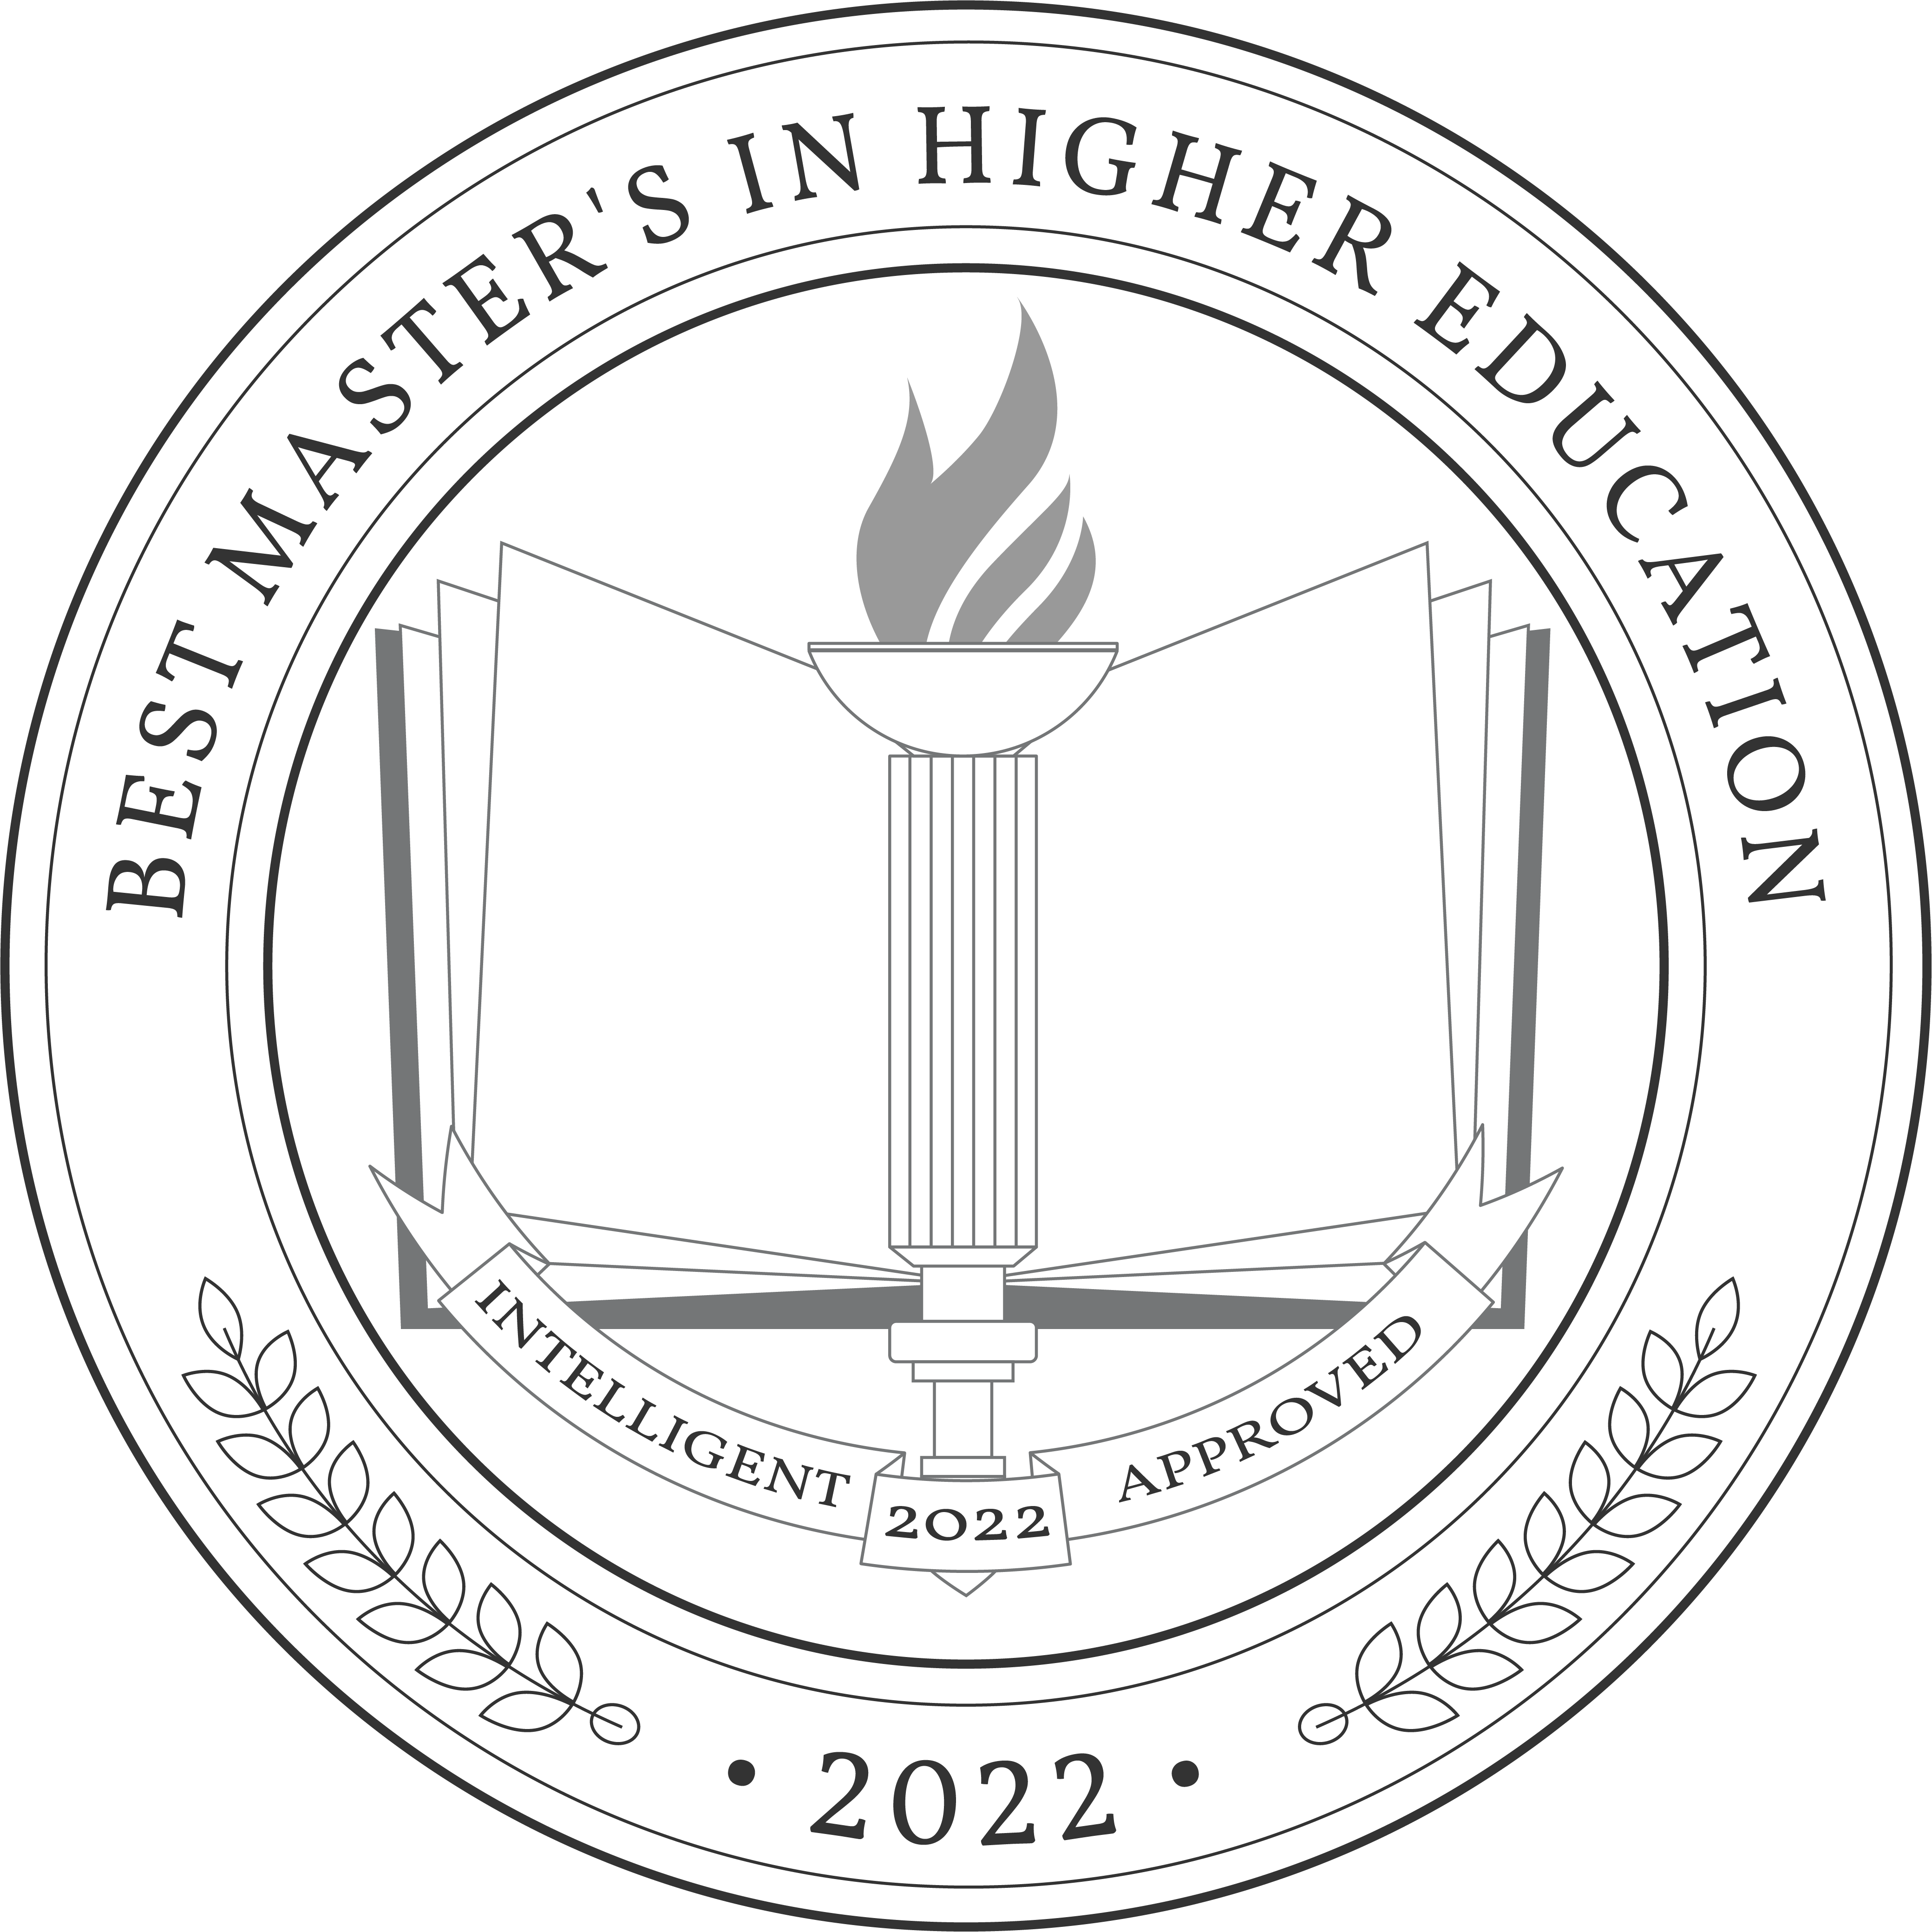 best-master_s-in-higher-education-badge.png